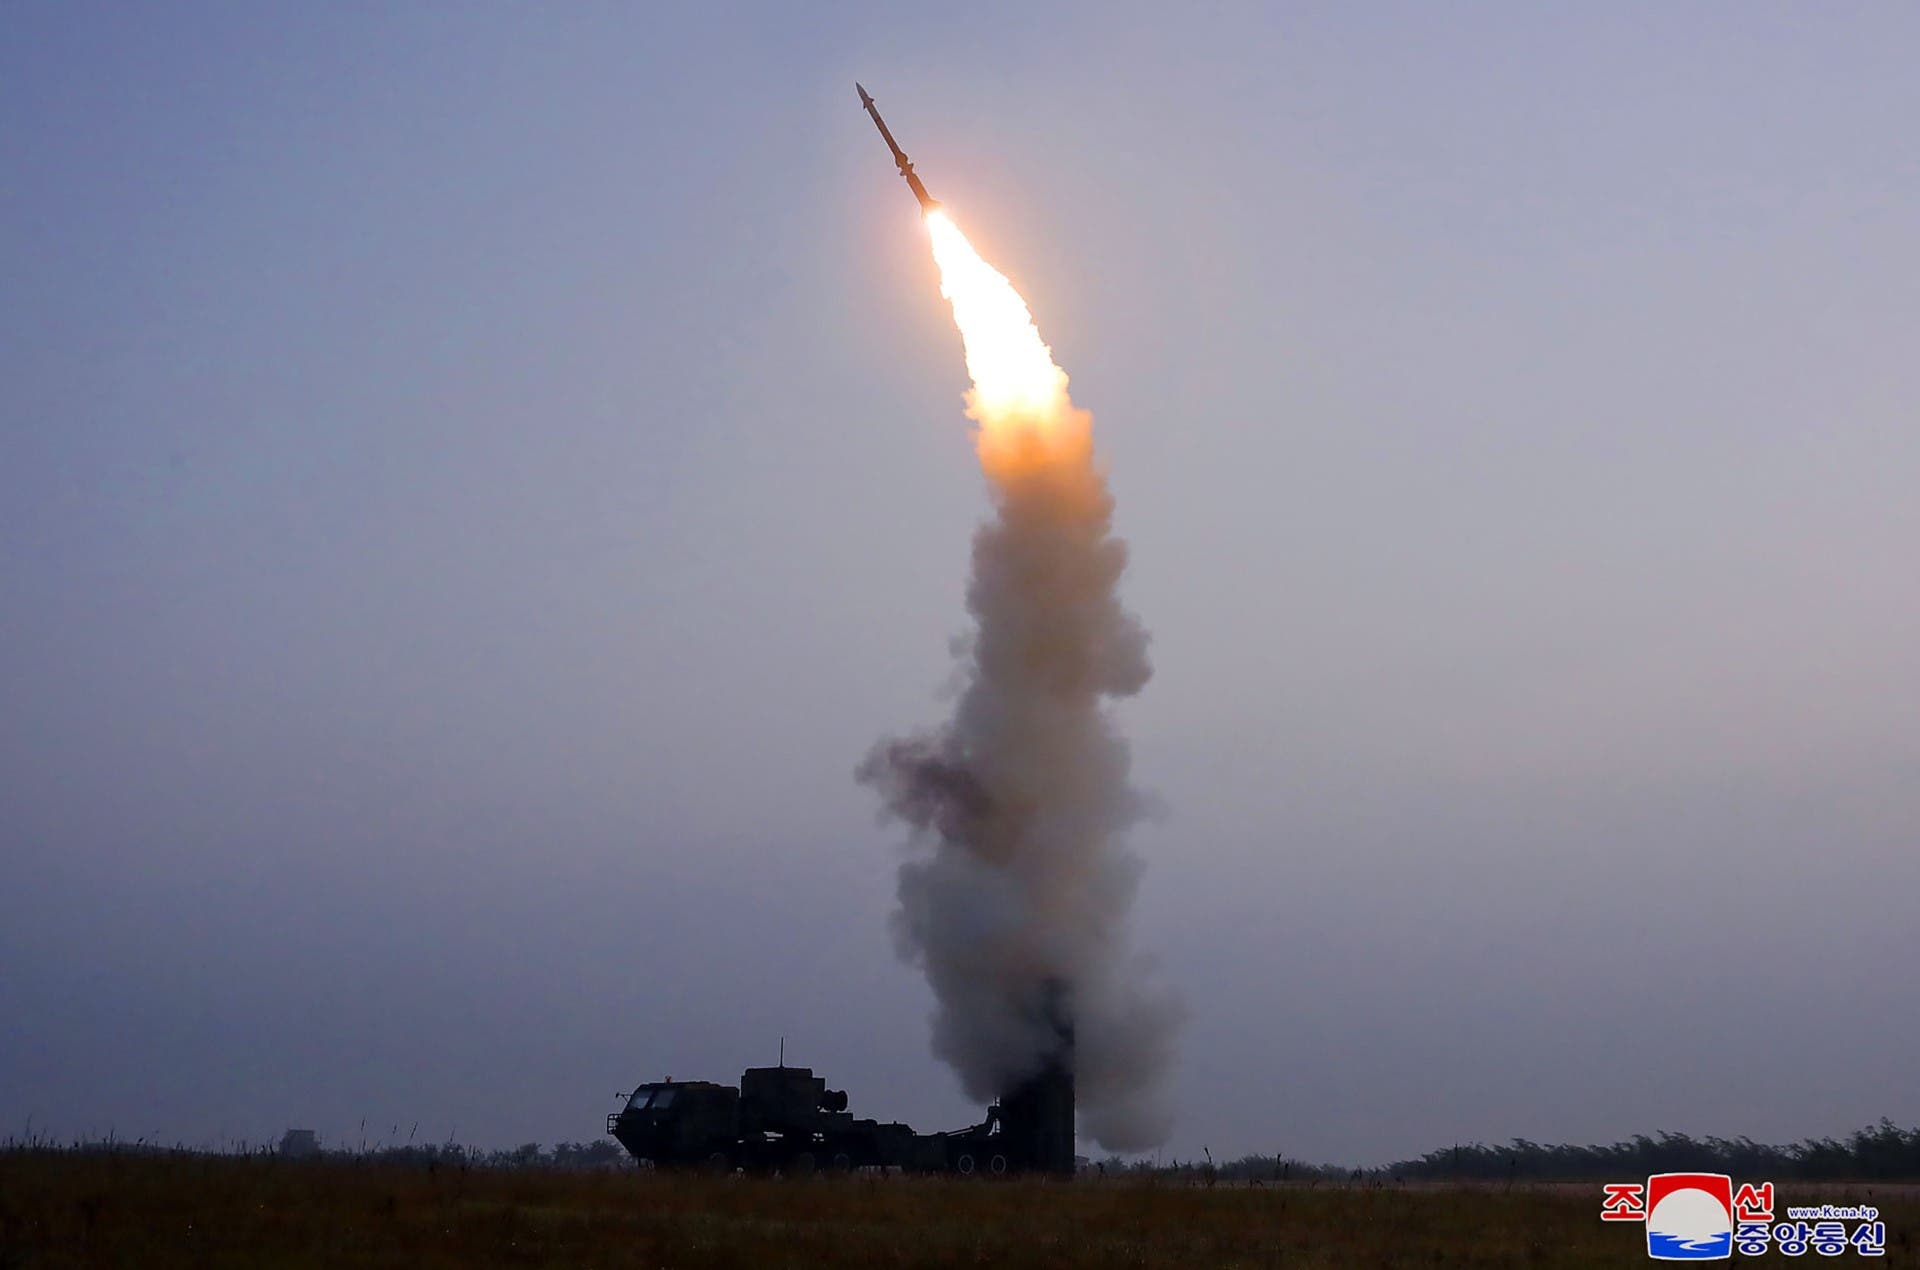 North Korea conducted a missile test last September